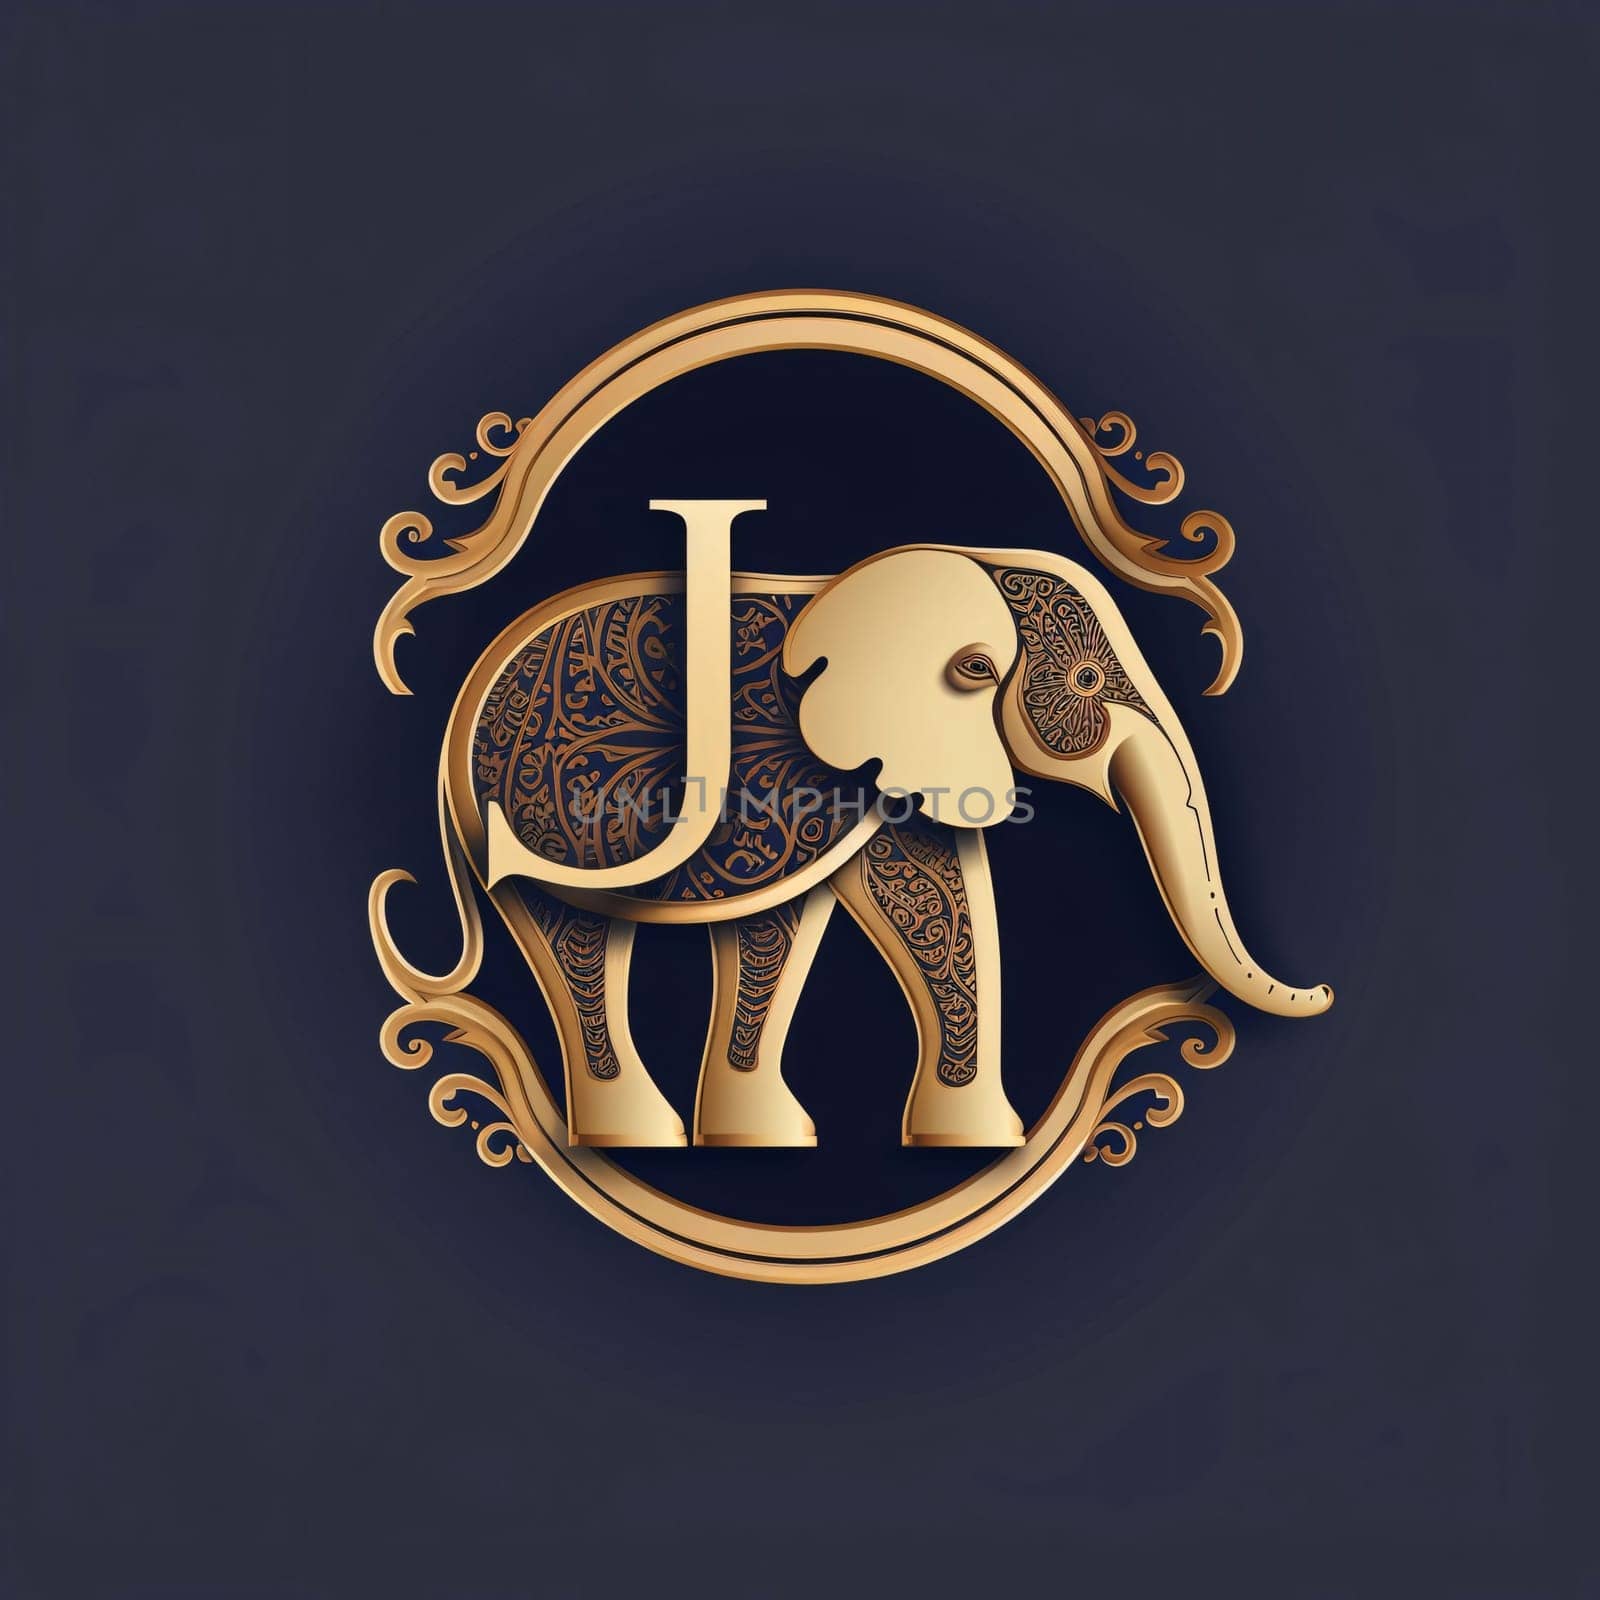 Graphic alphabet letters: Vector illustration of a gold elephant on a dark blue background. Can be used as a logo, icon or design element.